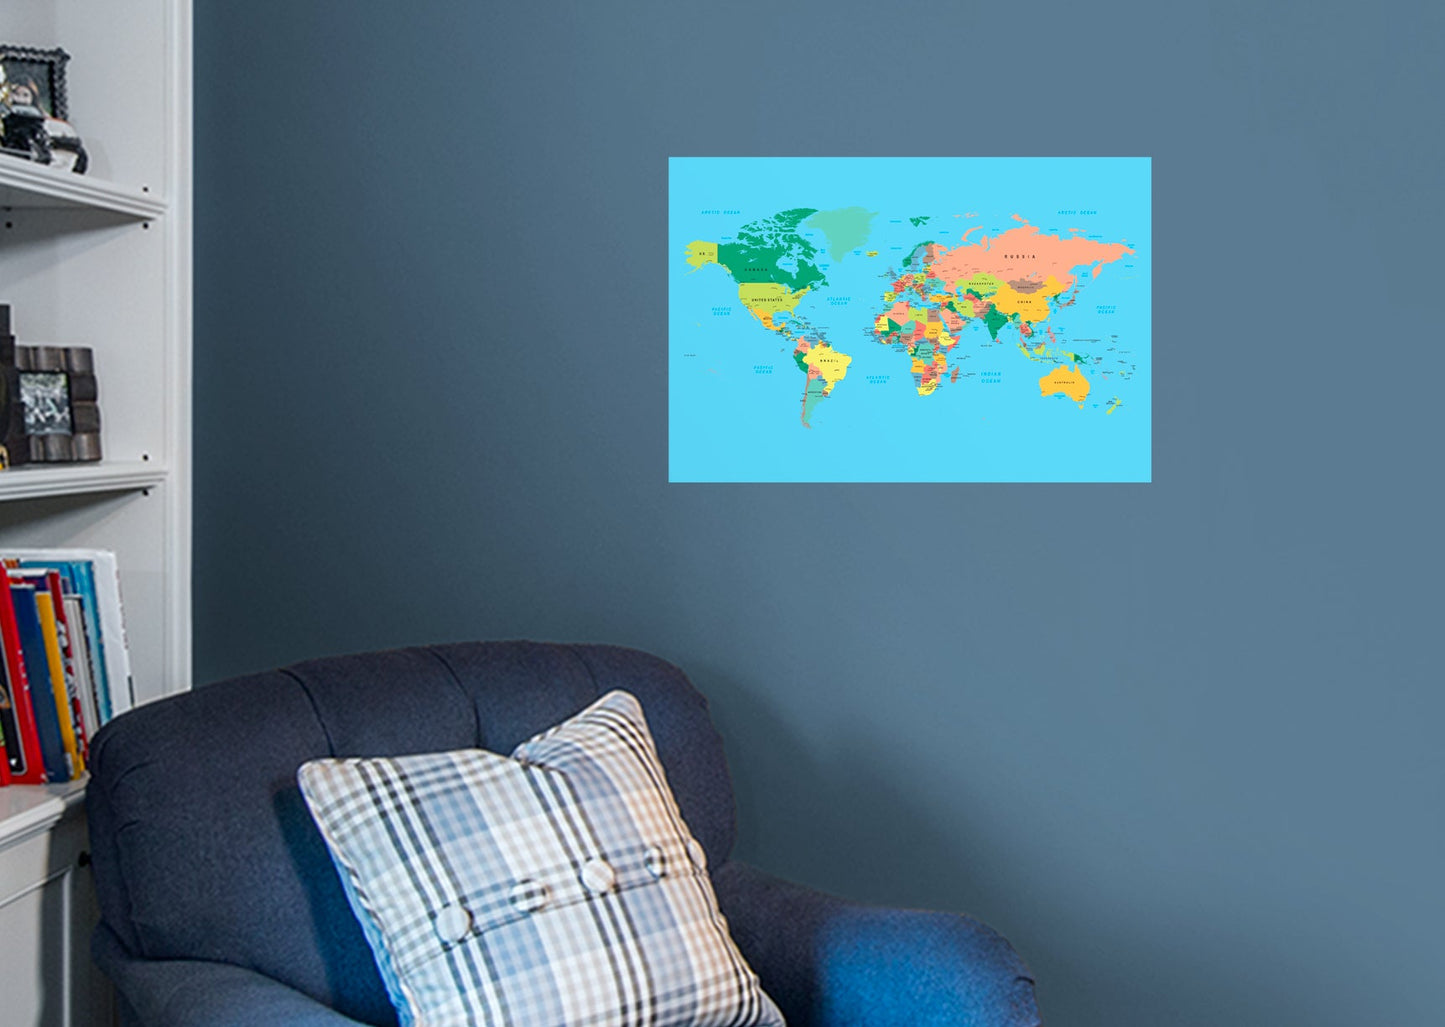 World Maps:  Classic World Map Mural        -   Removable Wall   Adhesive Decal